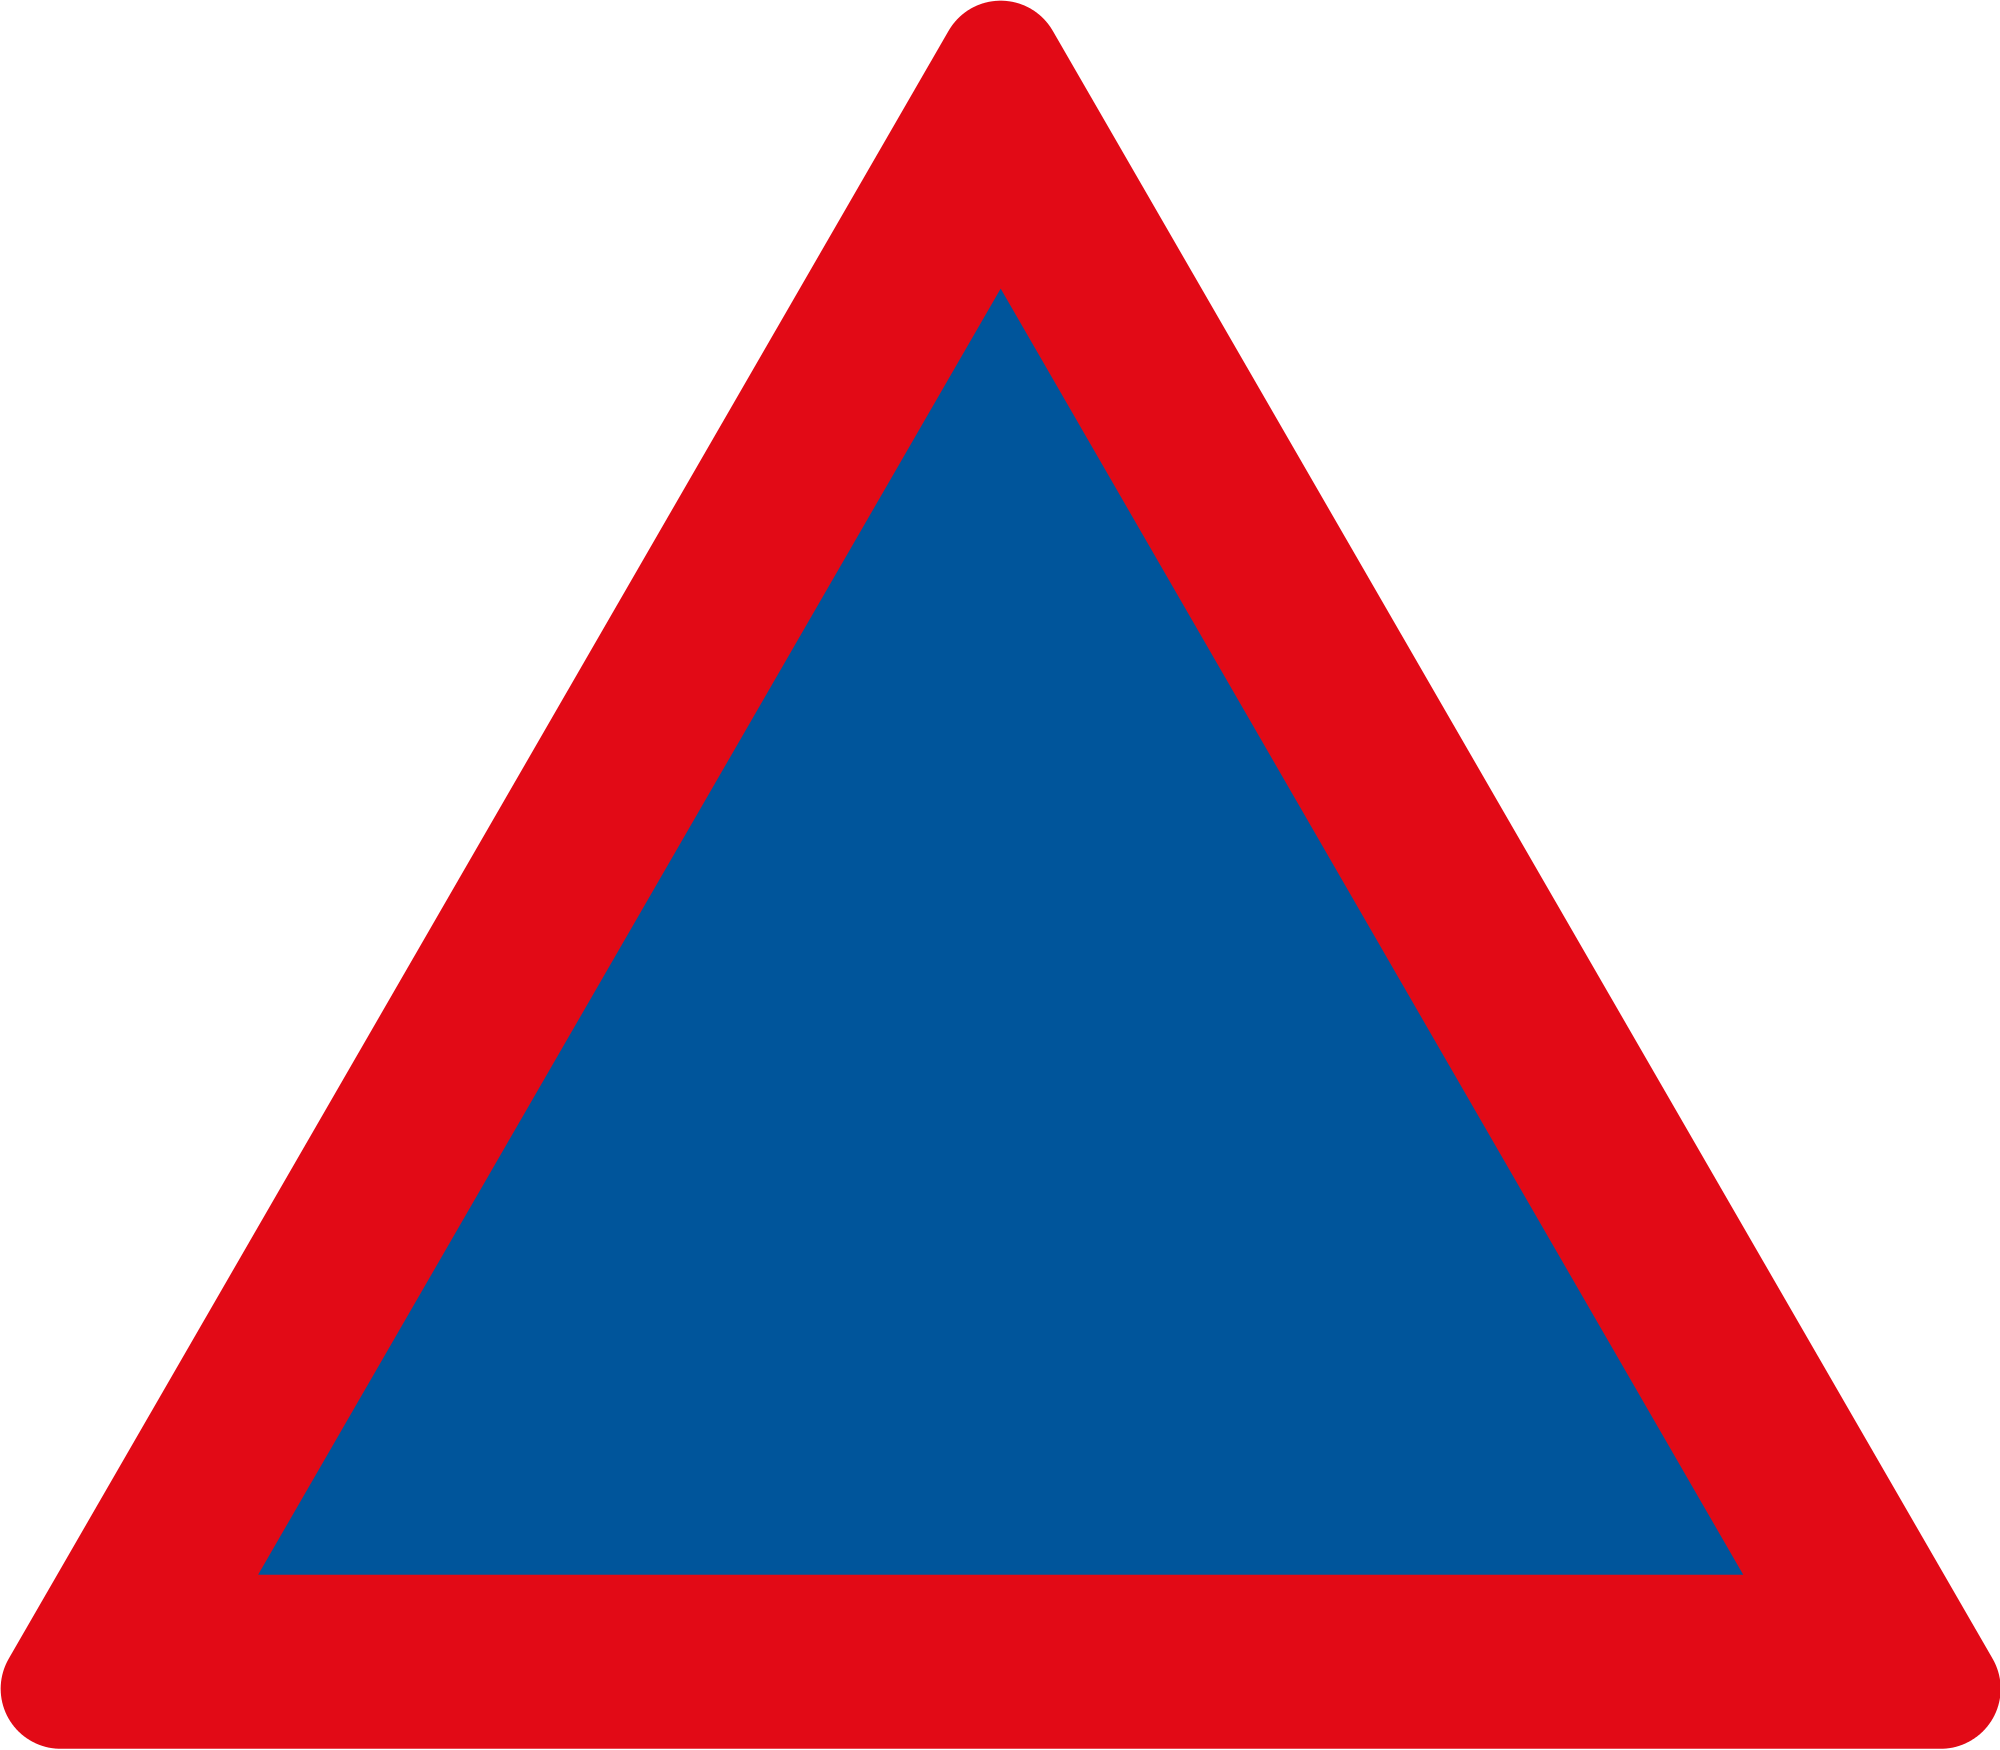 Blue and Red Triangle Logo - Triangle warning sign (red and blue).svg